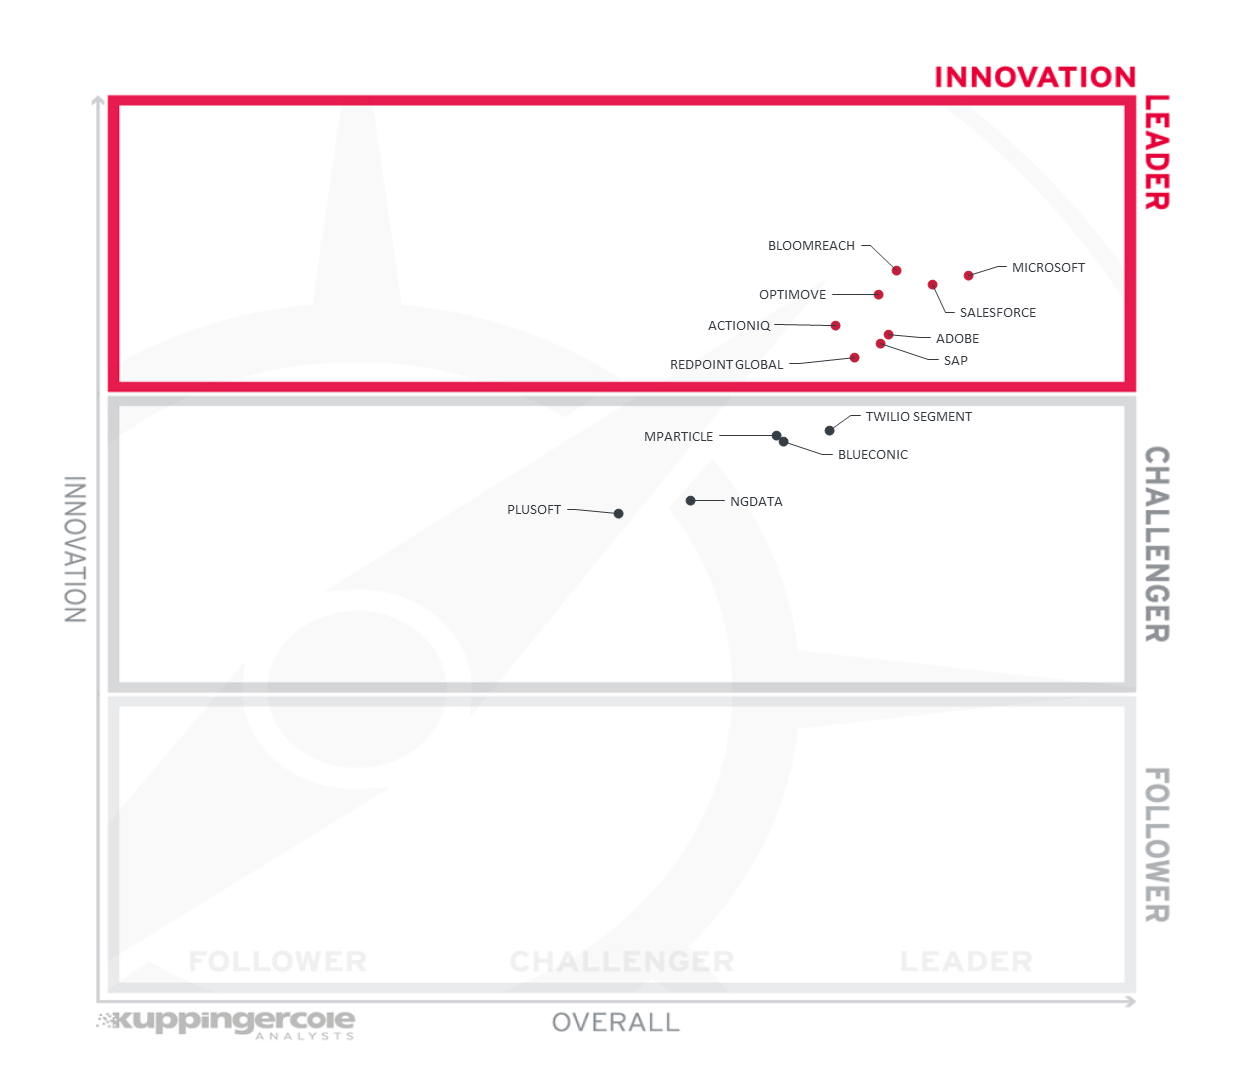 The Innovation Leadership rating for the LC Customer Data Platforms.